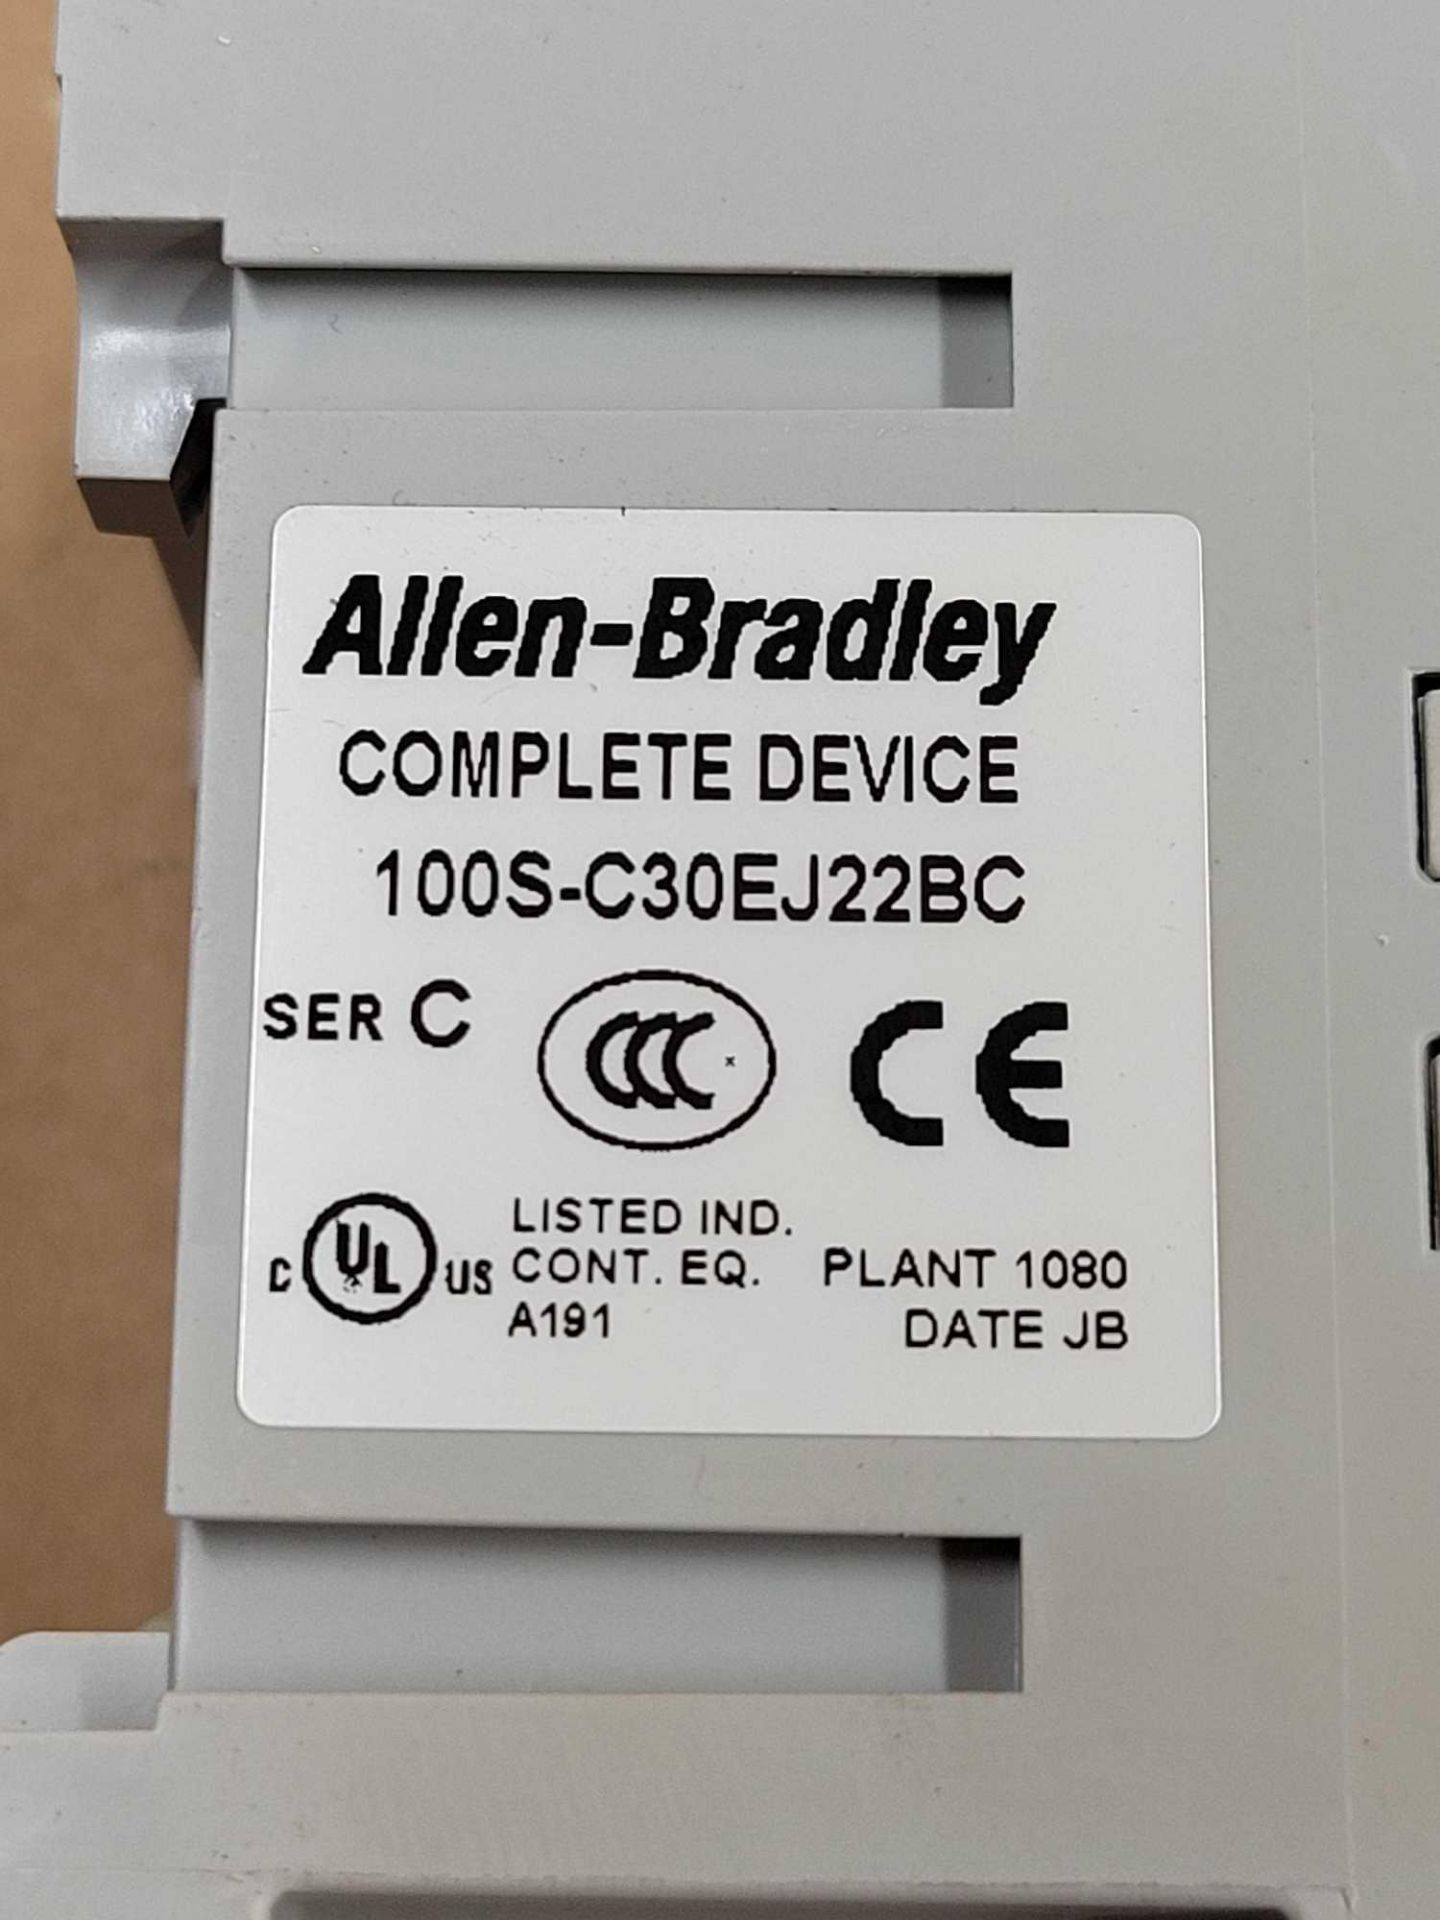 LOT OF 3 ALLEN BRADLEY 100S-C30EJ22BC / Series C Guardmaster Safety Contactor  /  Lot Weight: 3.8 lb - Image 2 of 3